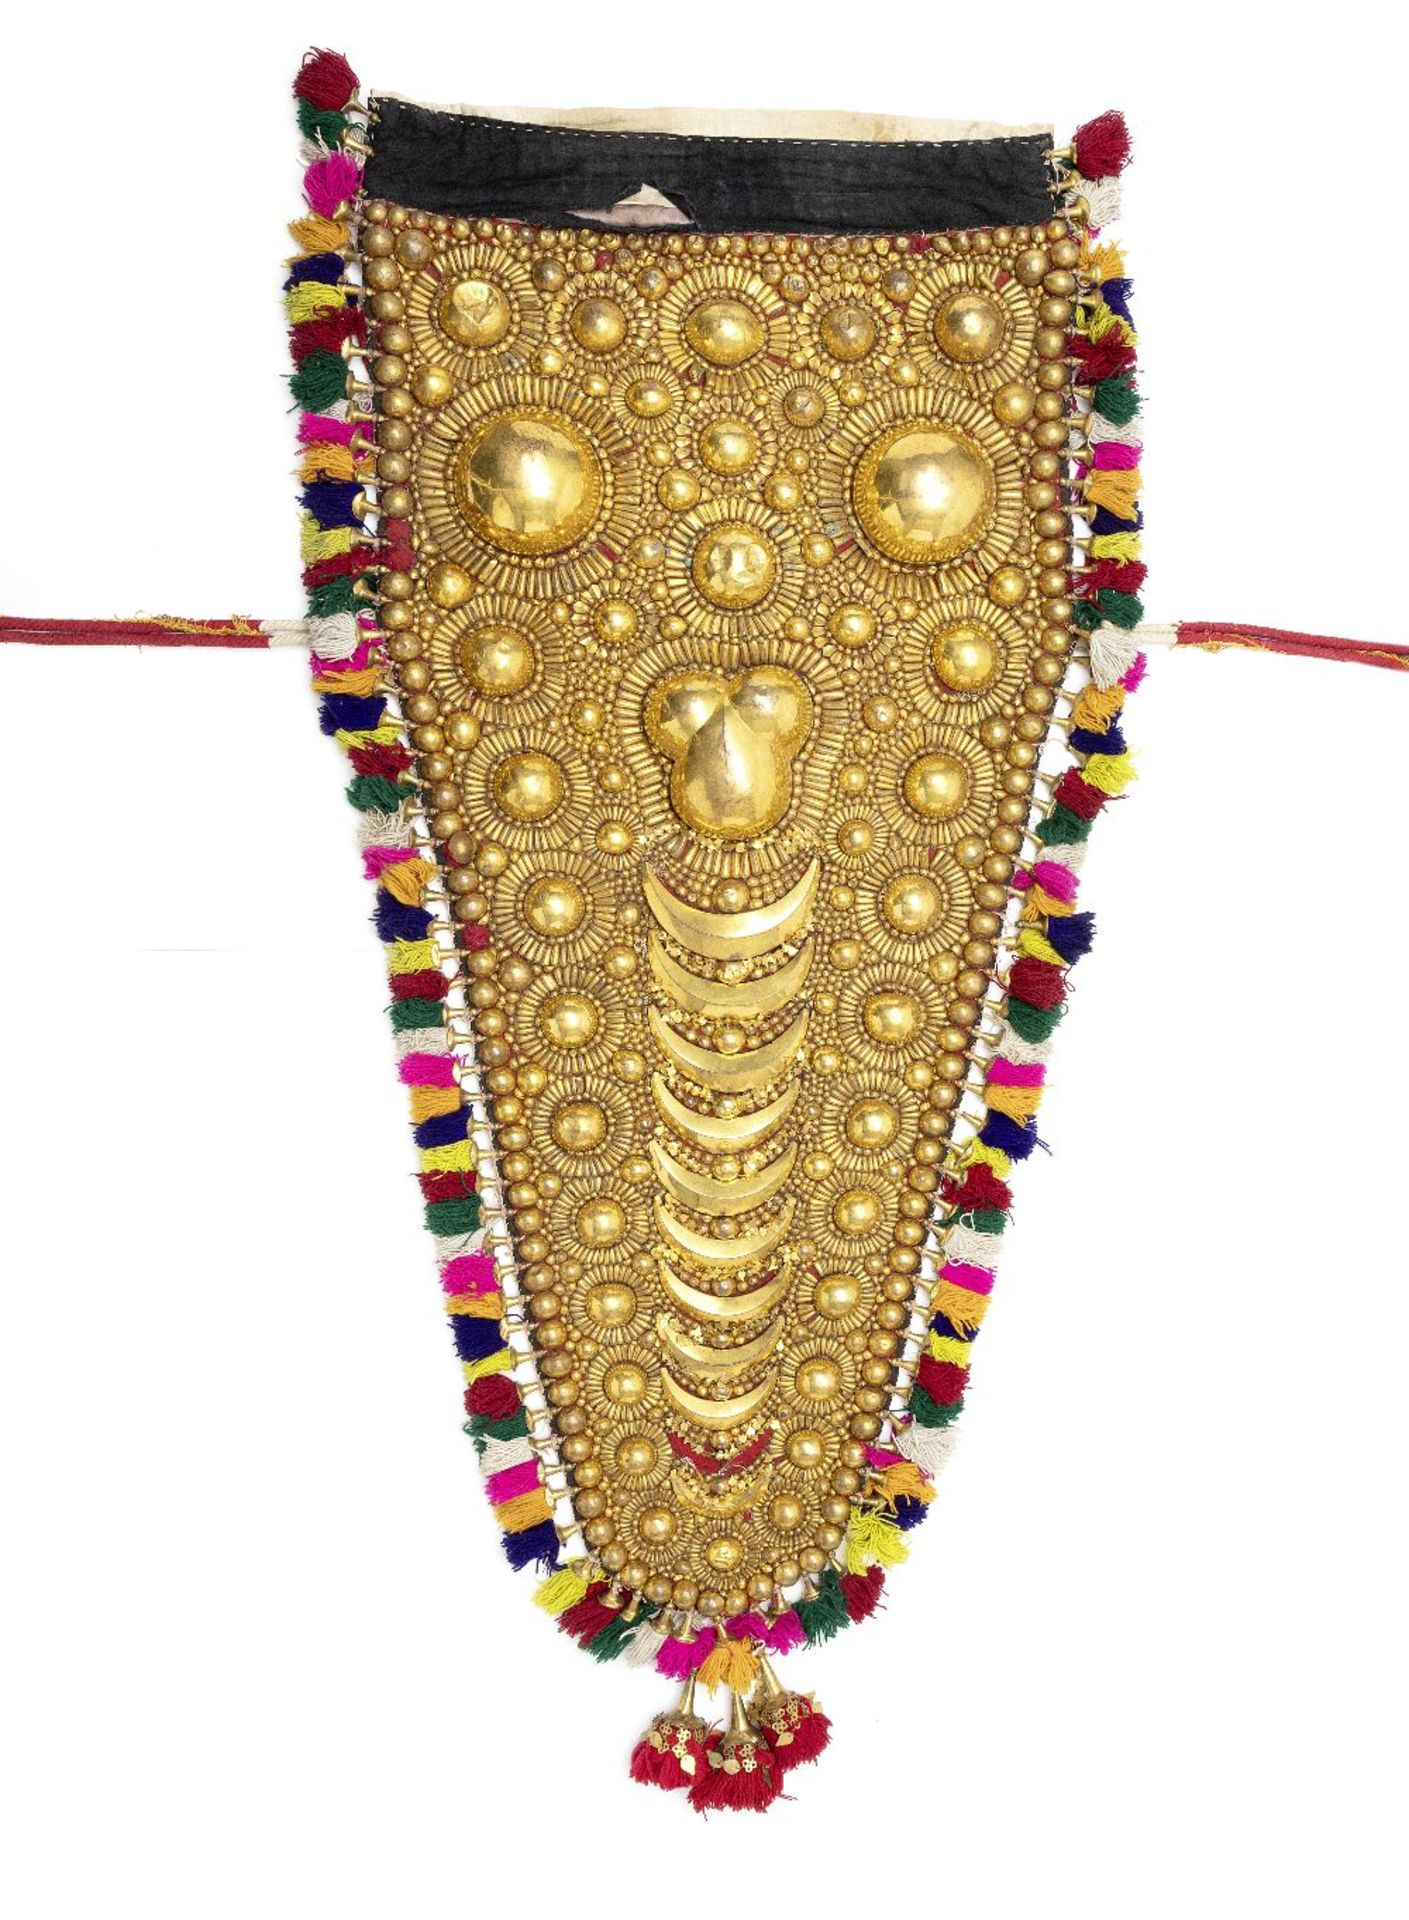 A gilt-copper mounted elephant head ornament (nettipattam) South India, 20th Century